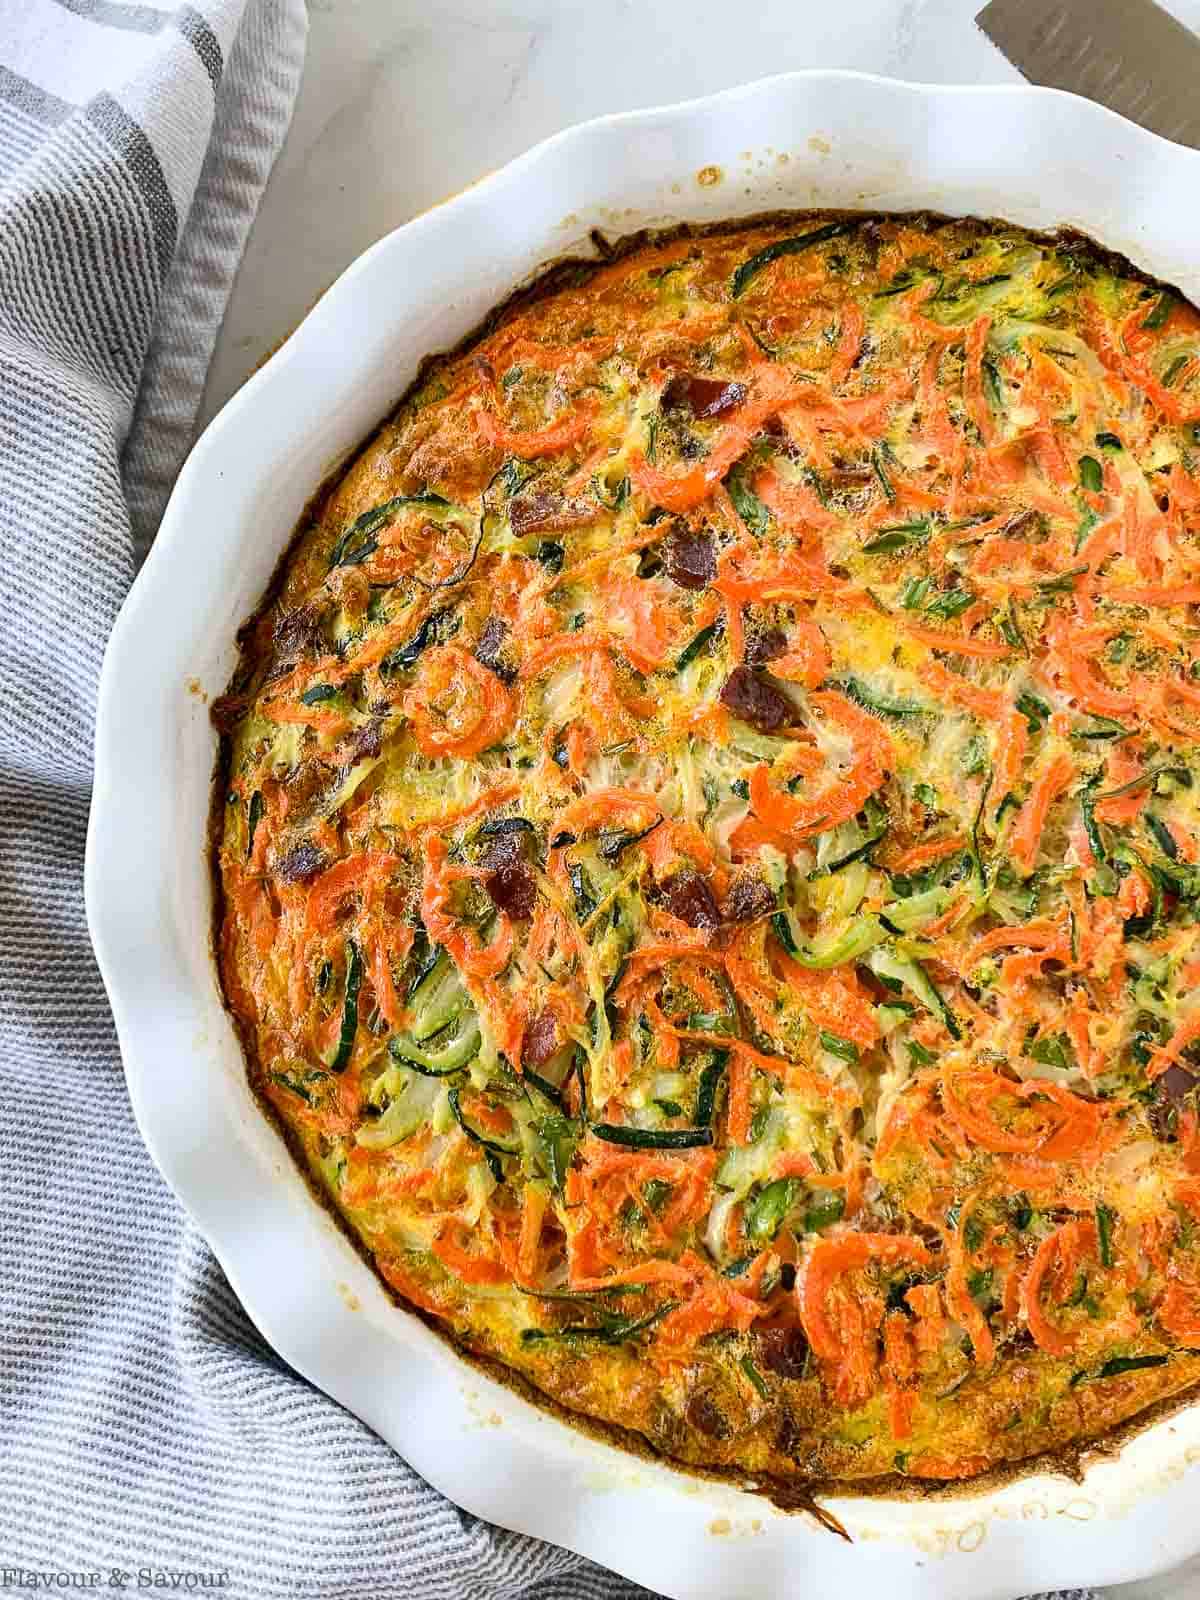 Closeup view of a baked zucchini carrot quiche.